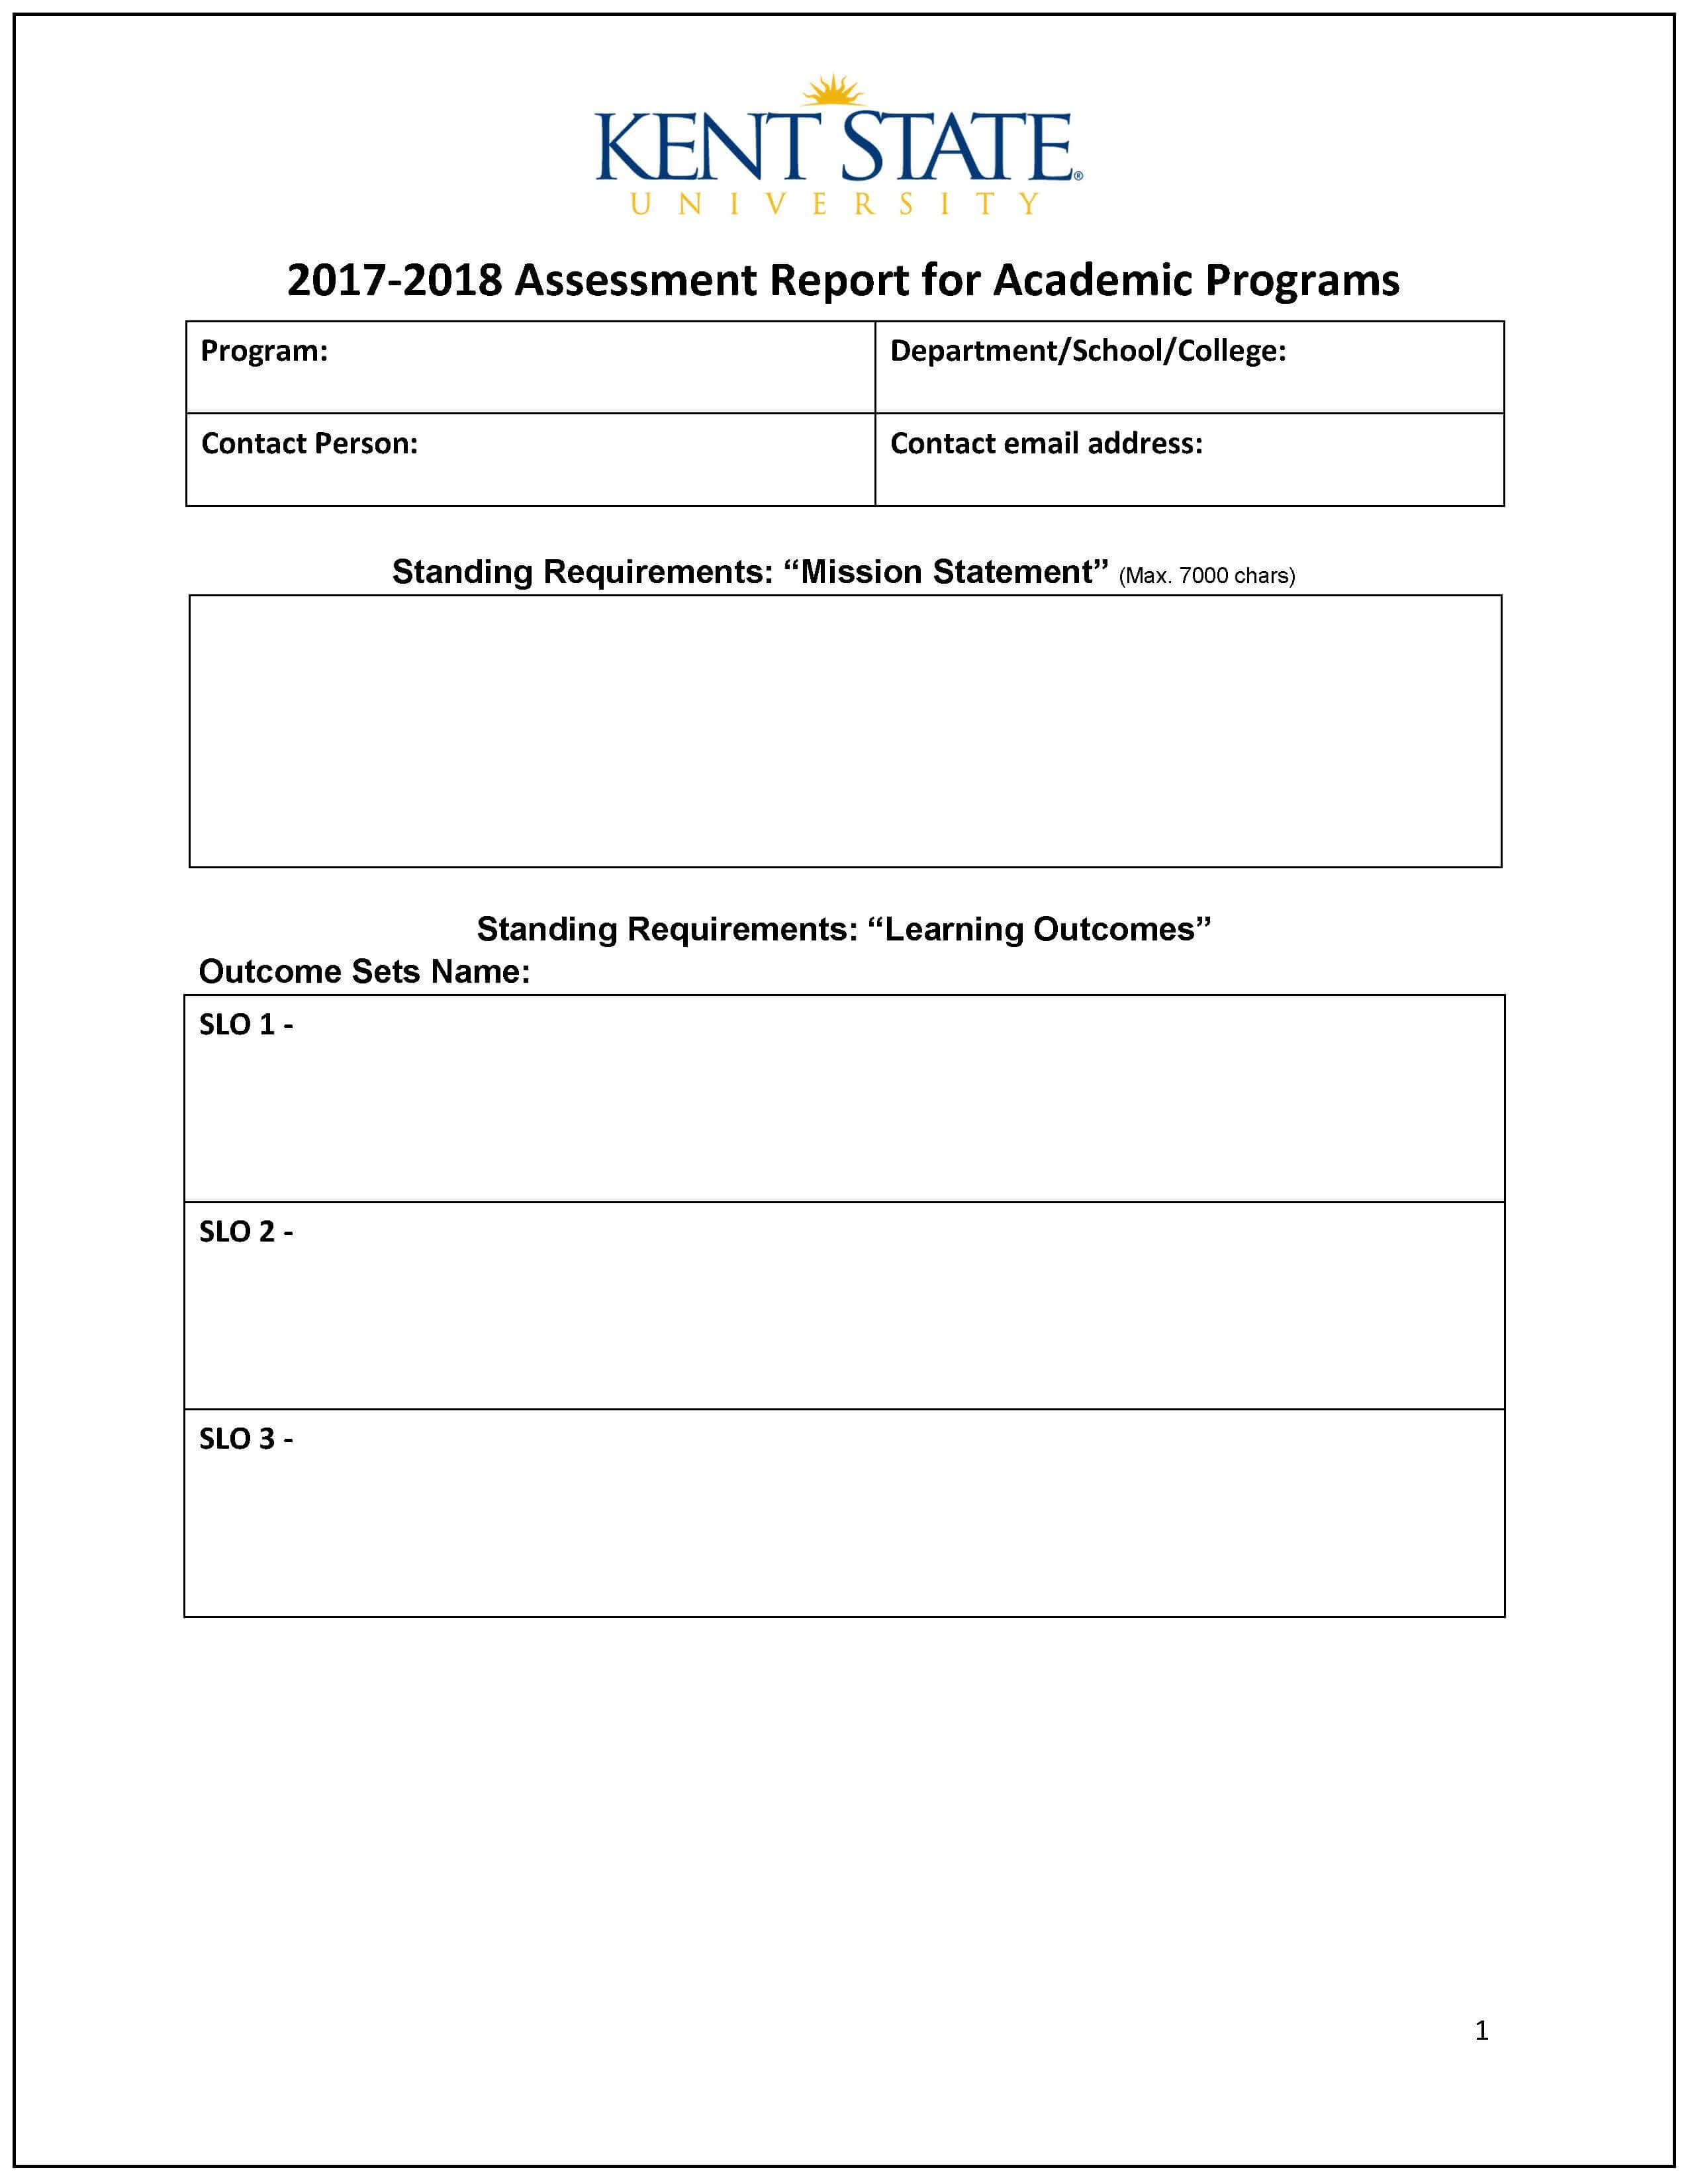 Assessment Report – Word Template | Accreditation With Regard To Word Document Report Templates